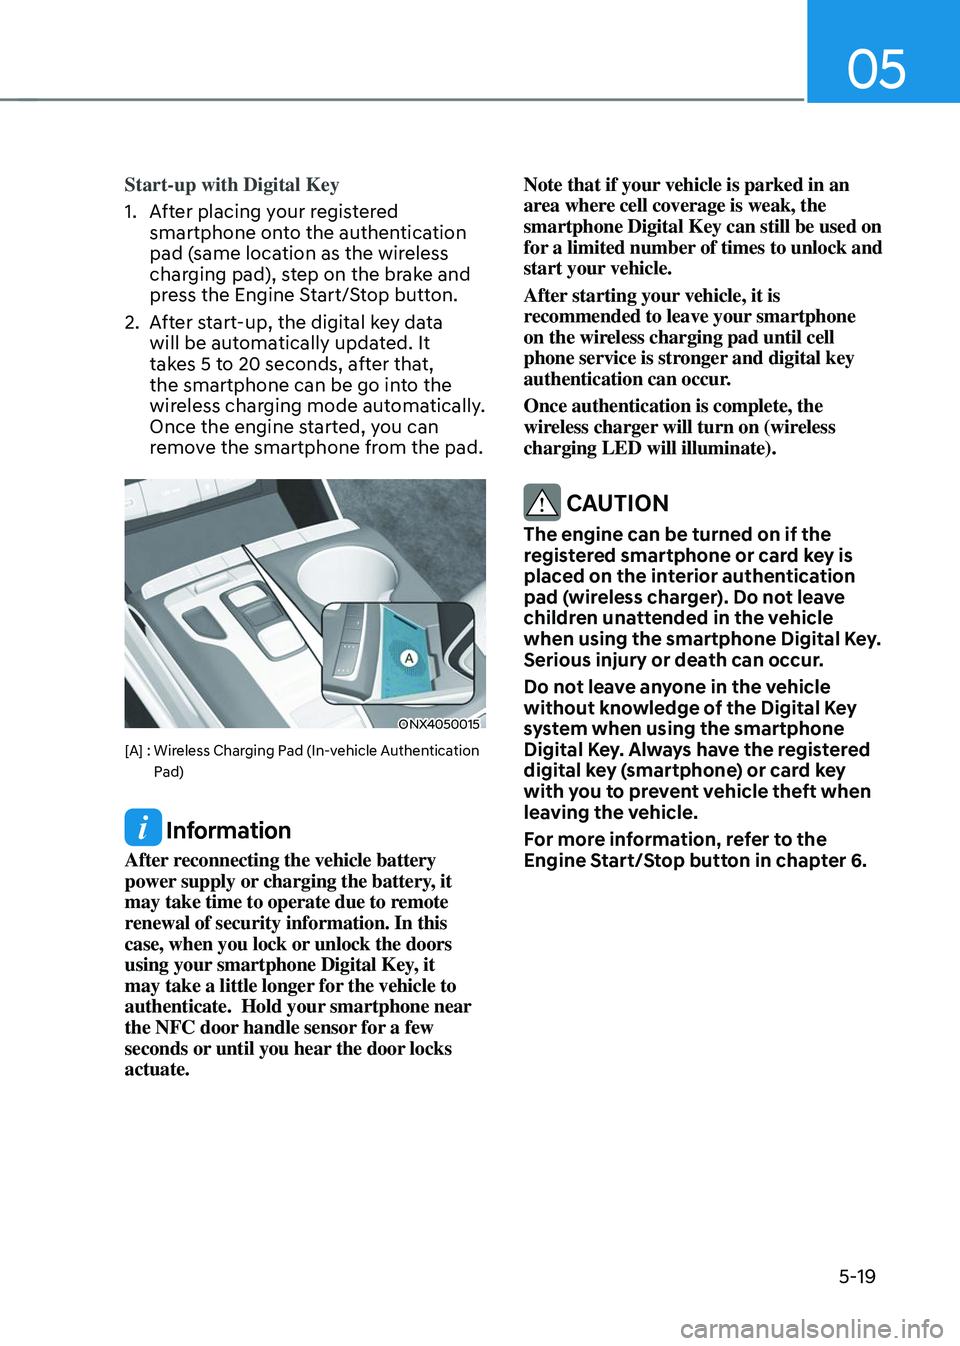 HYUNDAI TUCSON 2023  Owners Manual 05
5-19
Start-up with Digital Key
1. After placing your registered 
smartphone onto the authentication 
pad (same location as the wireless 
charging pad), step on the brake and 
press the Engine Start